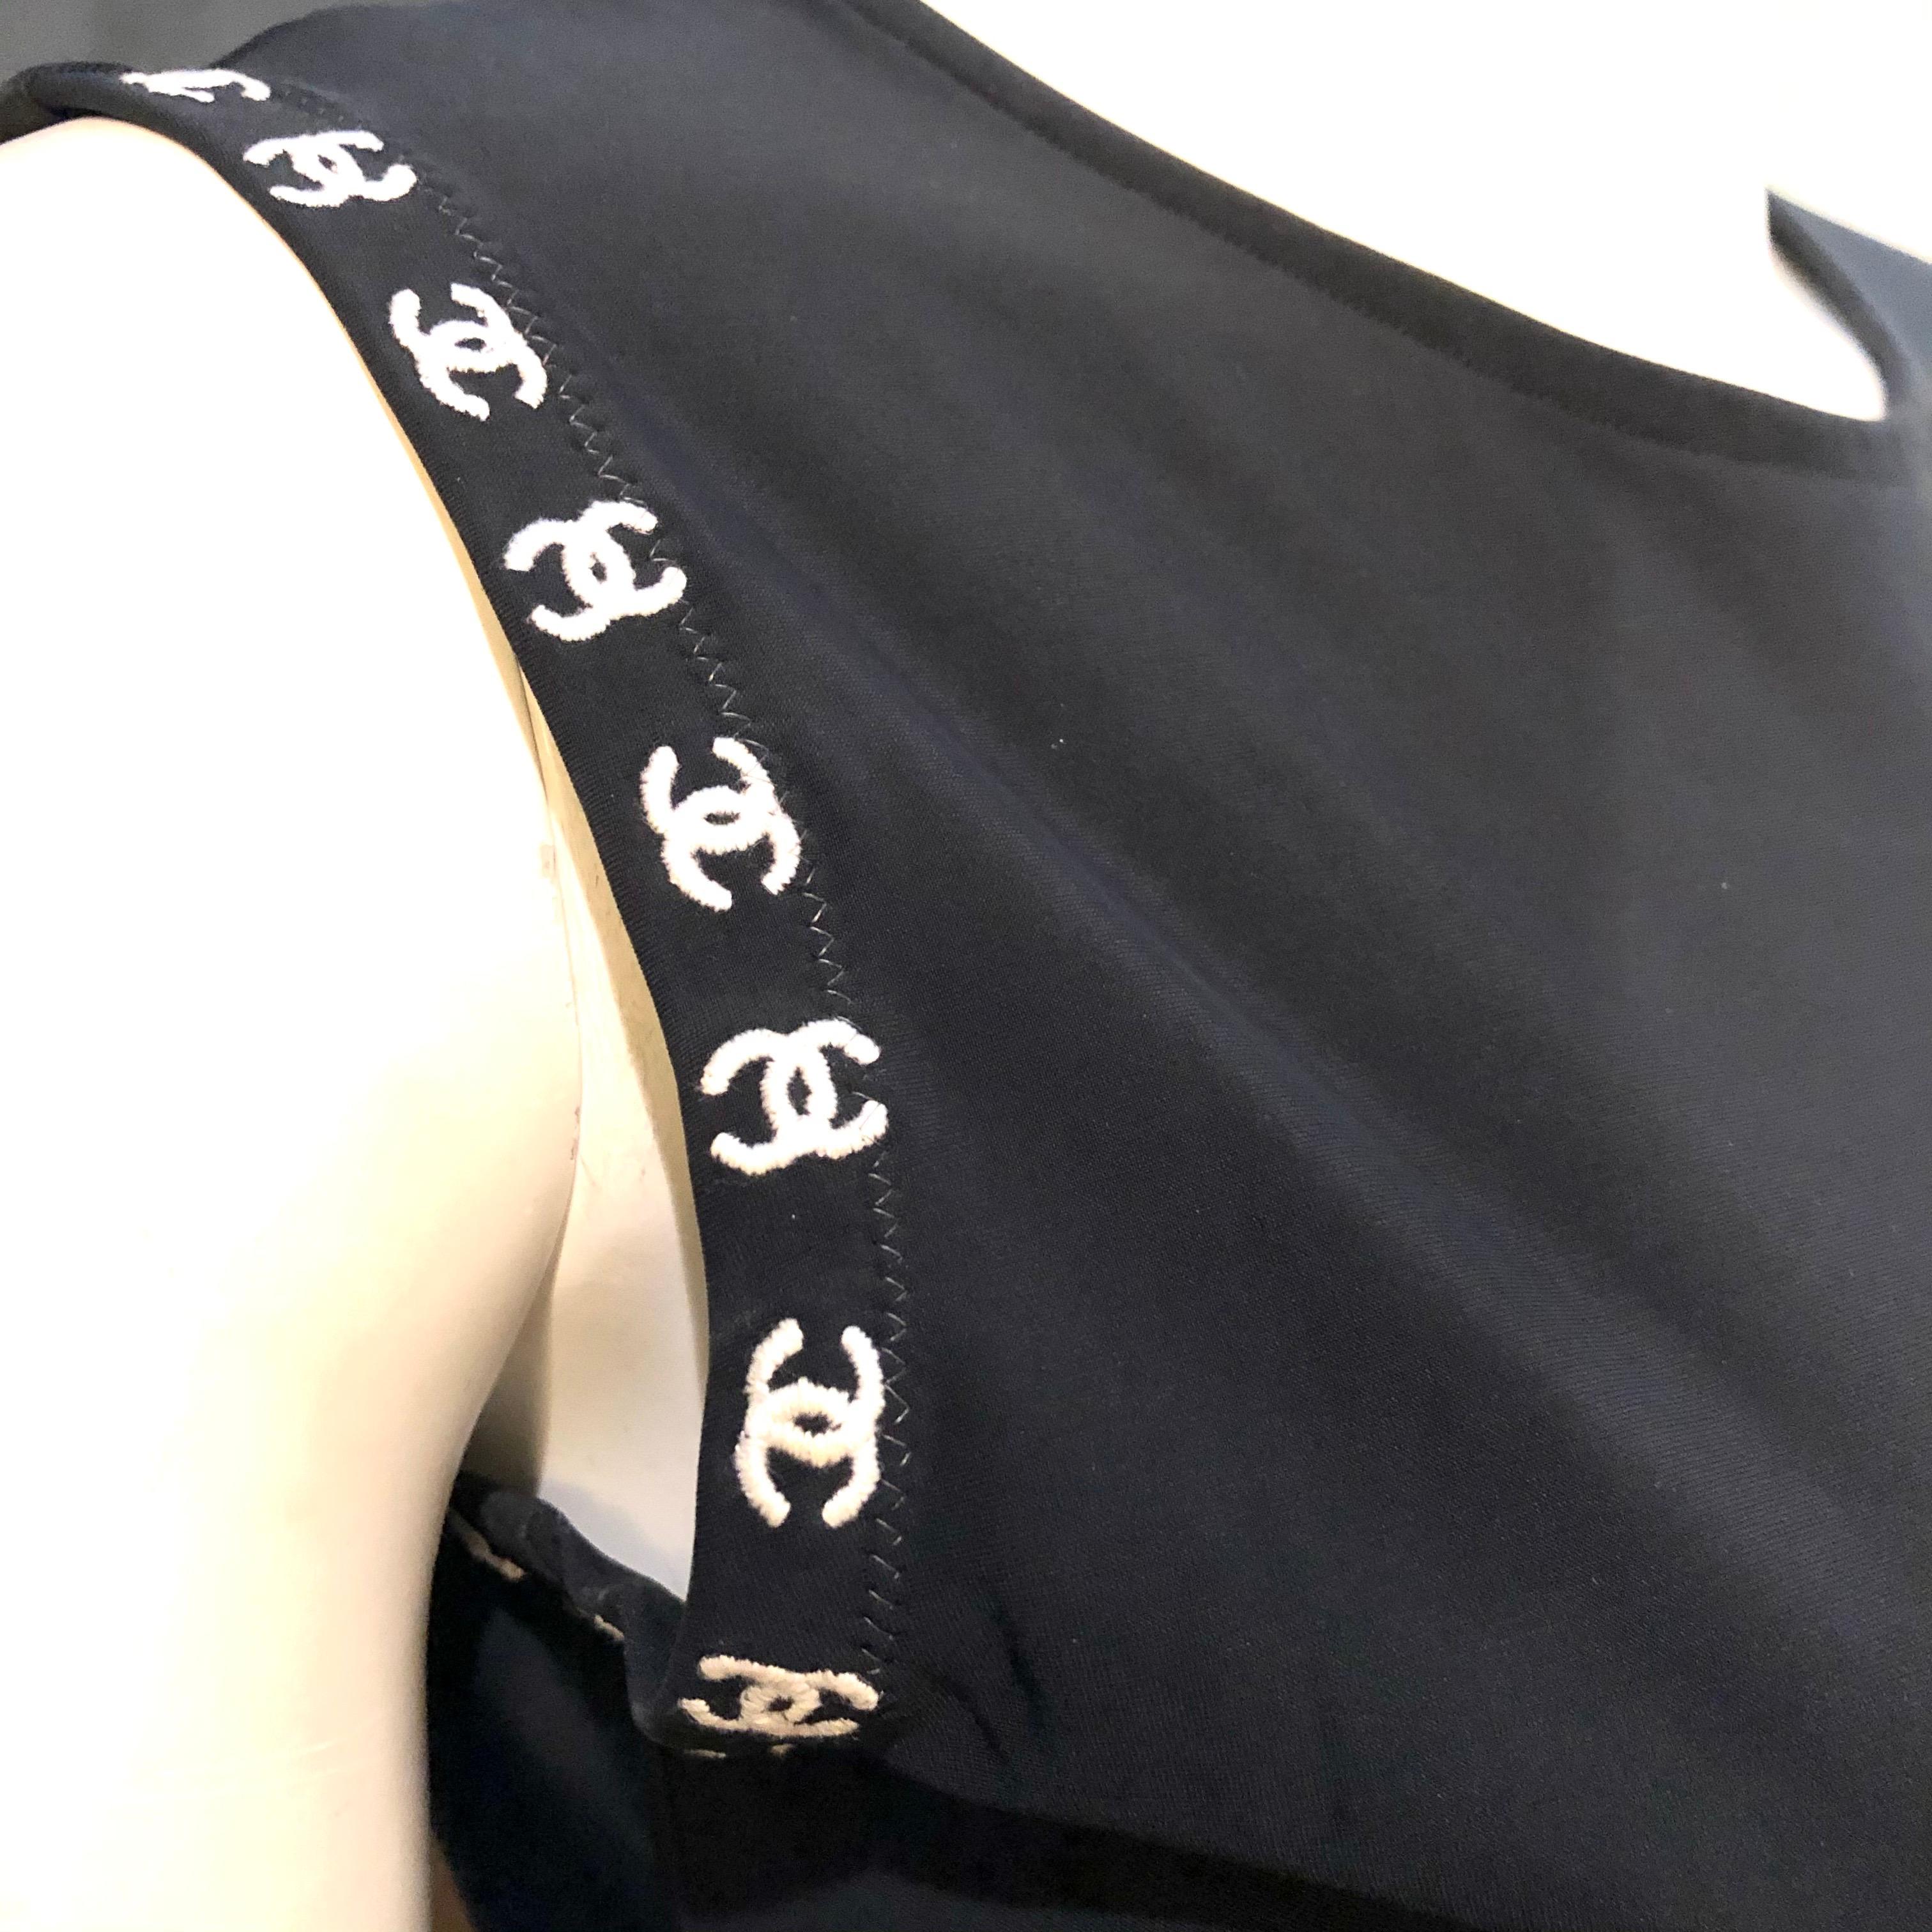 Retro Chanel Tank Top - 9 For Sale on 1stDibs